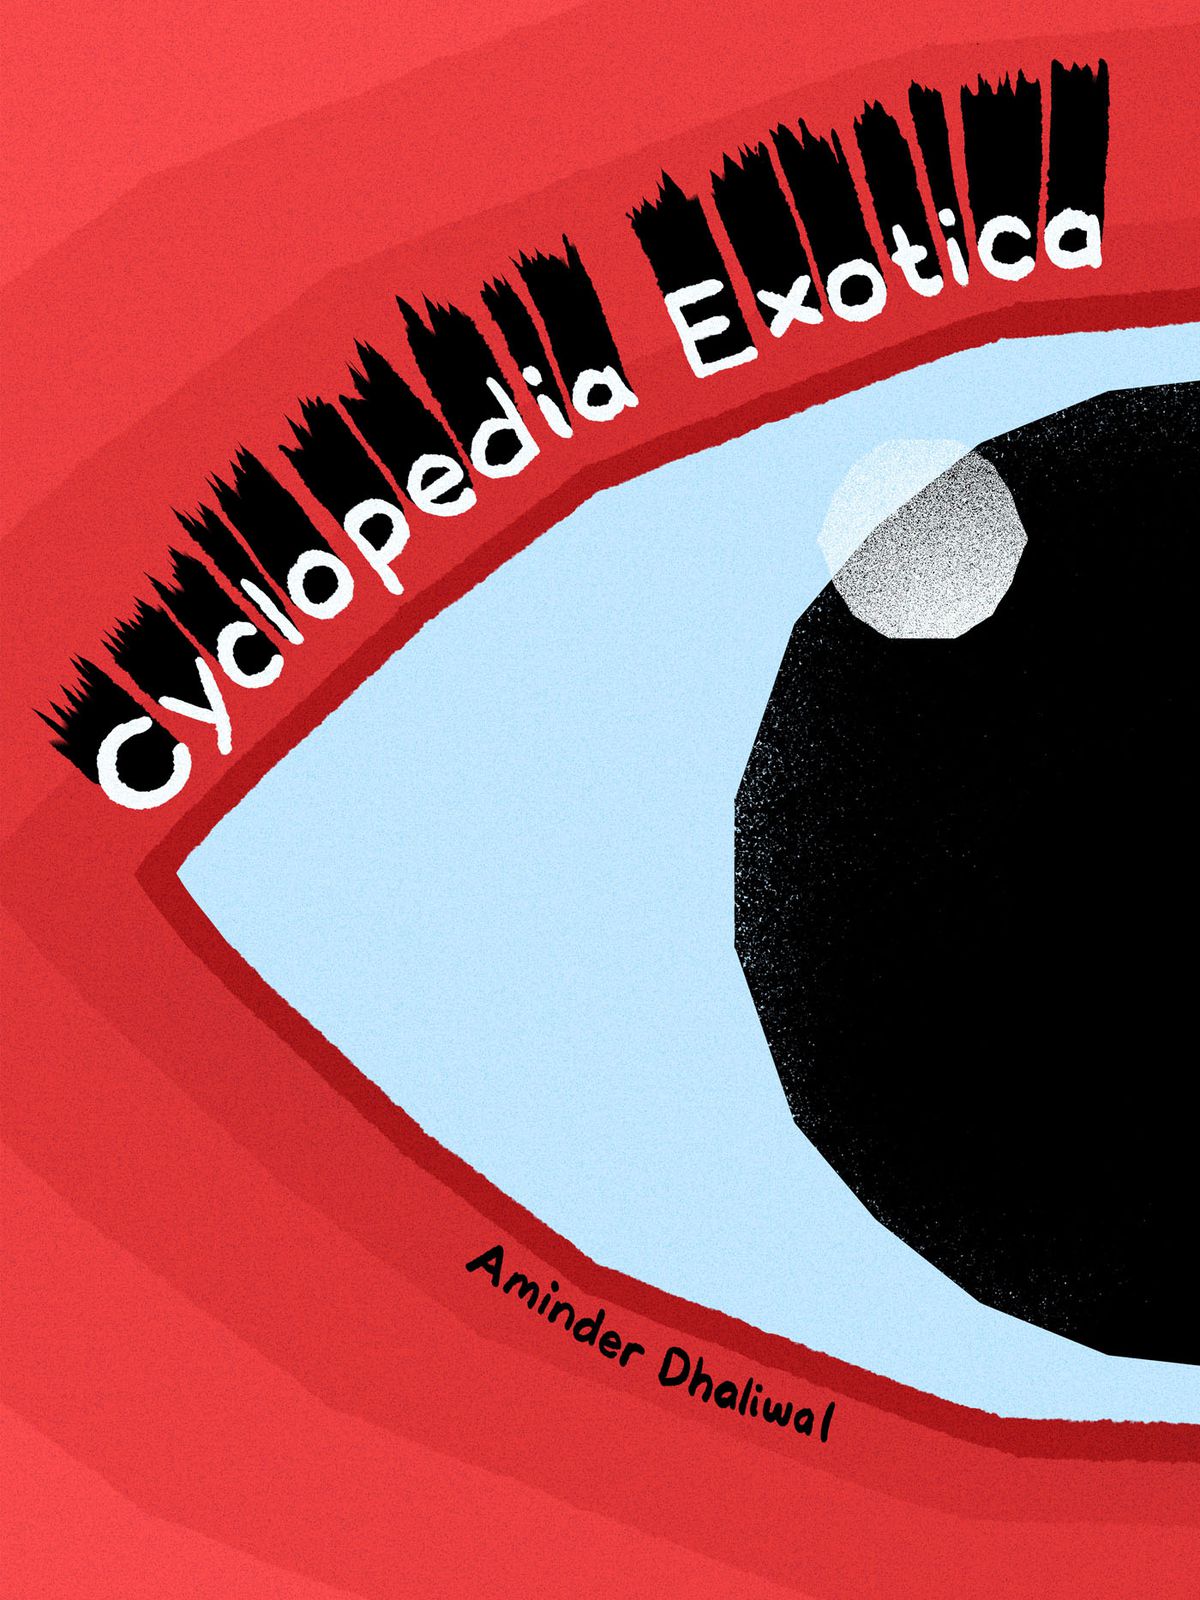 A huge single eye on a red background on the cover of Cyclopedia Exotica. 